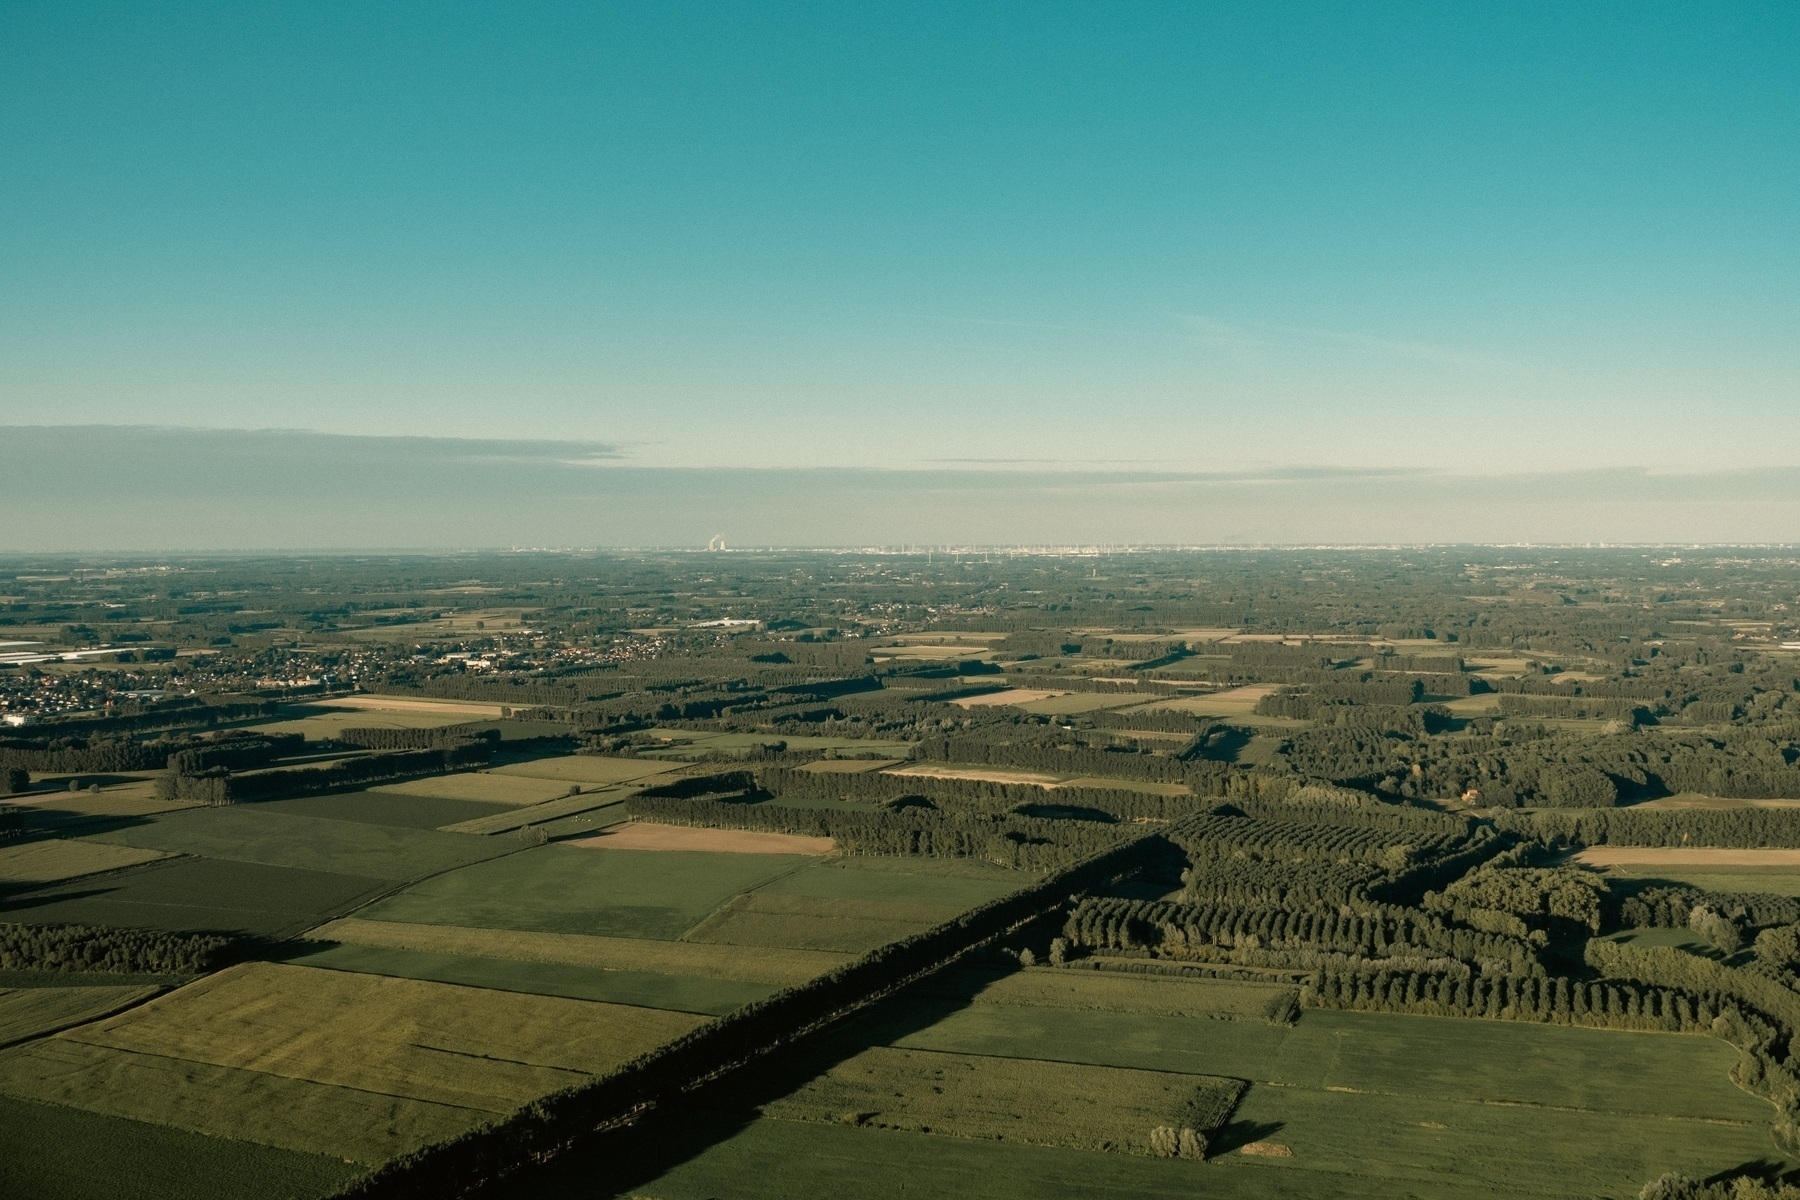 View of Belgium from the balloon, with Antwerp at the horizon